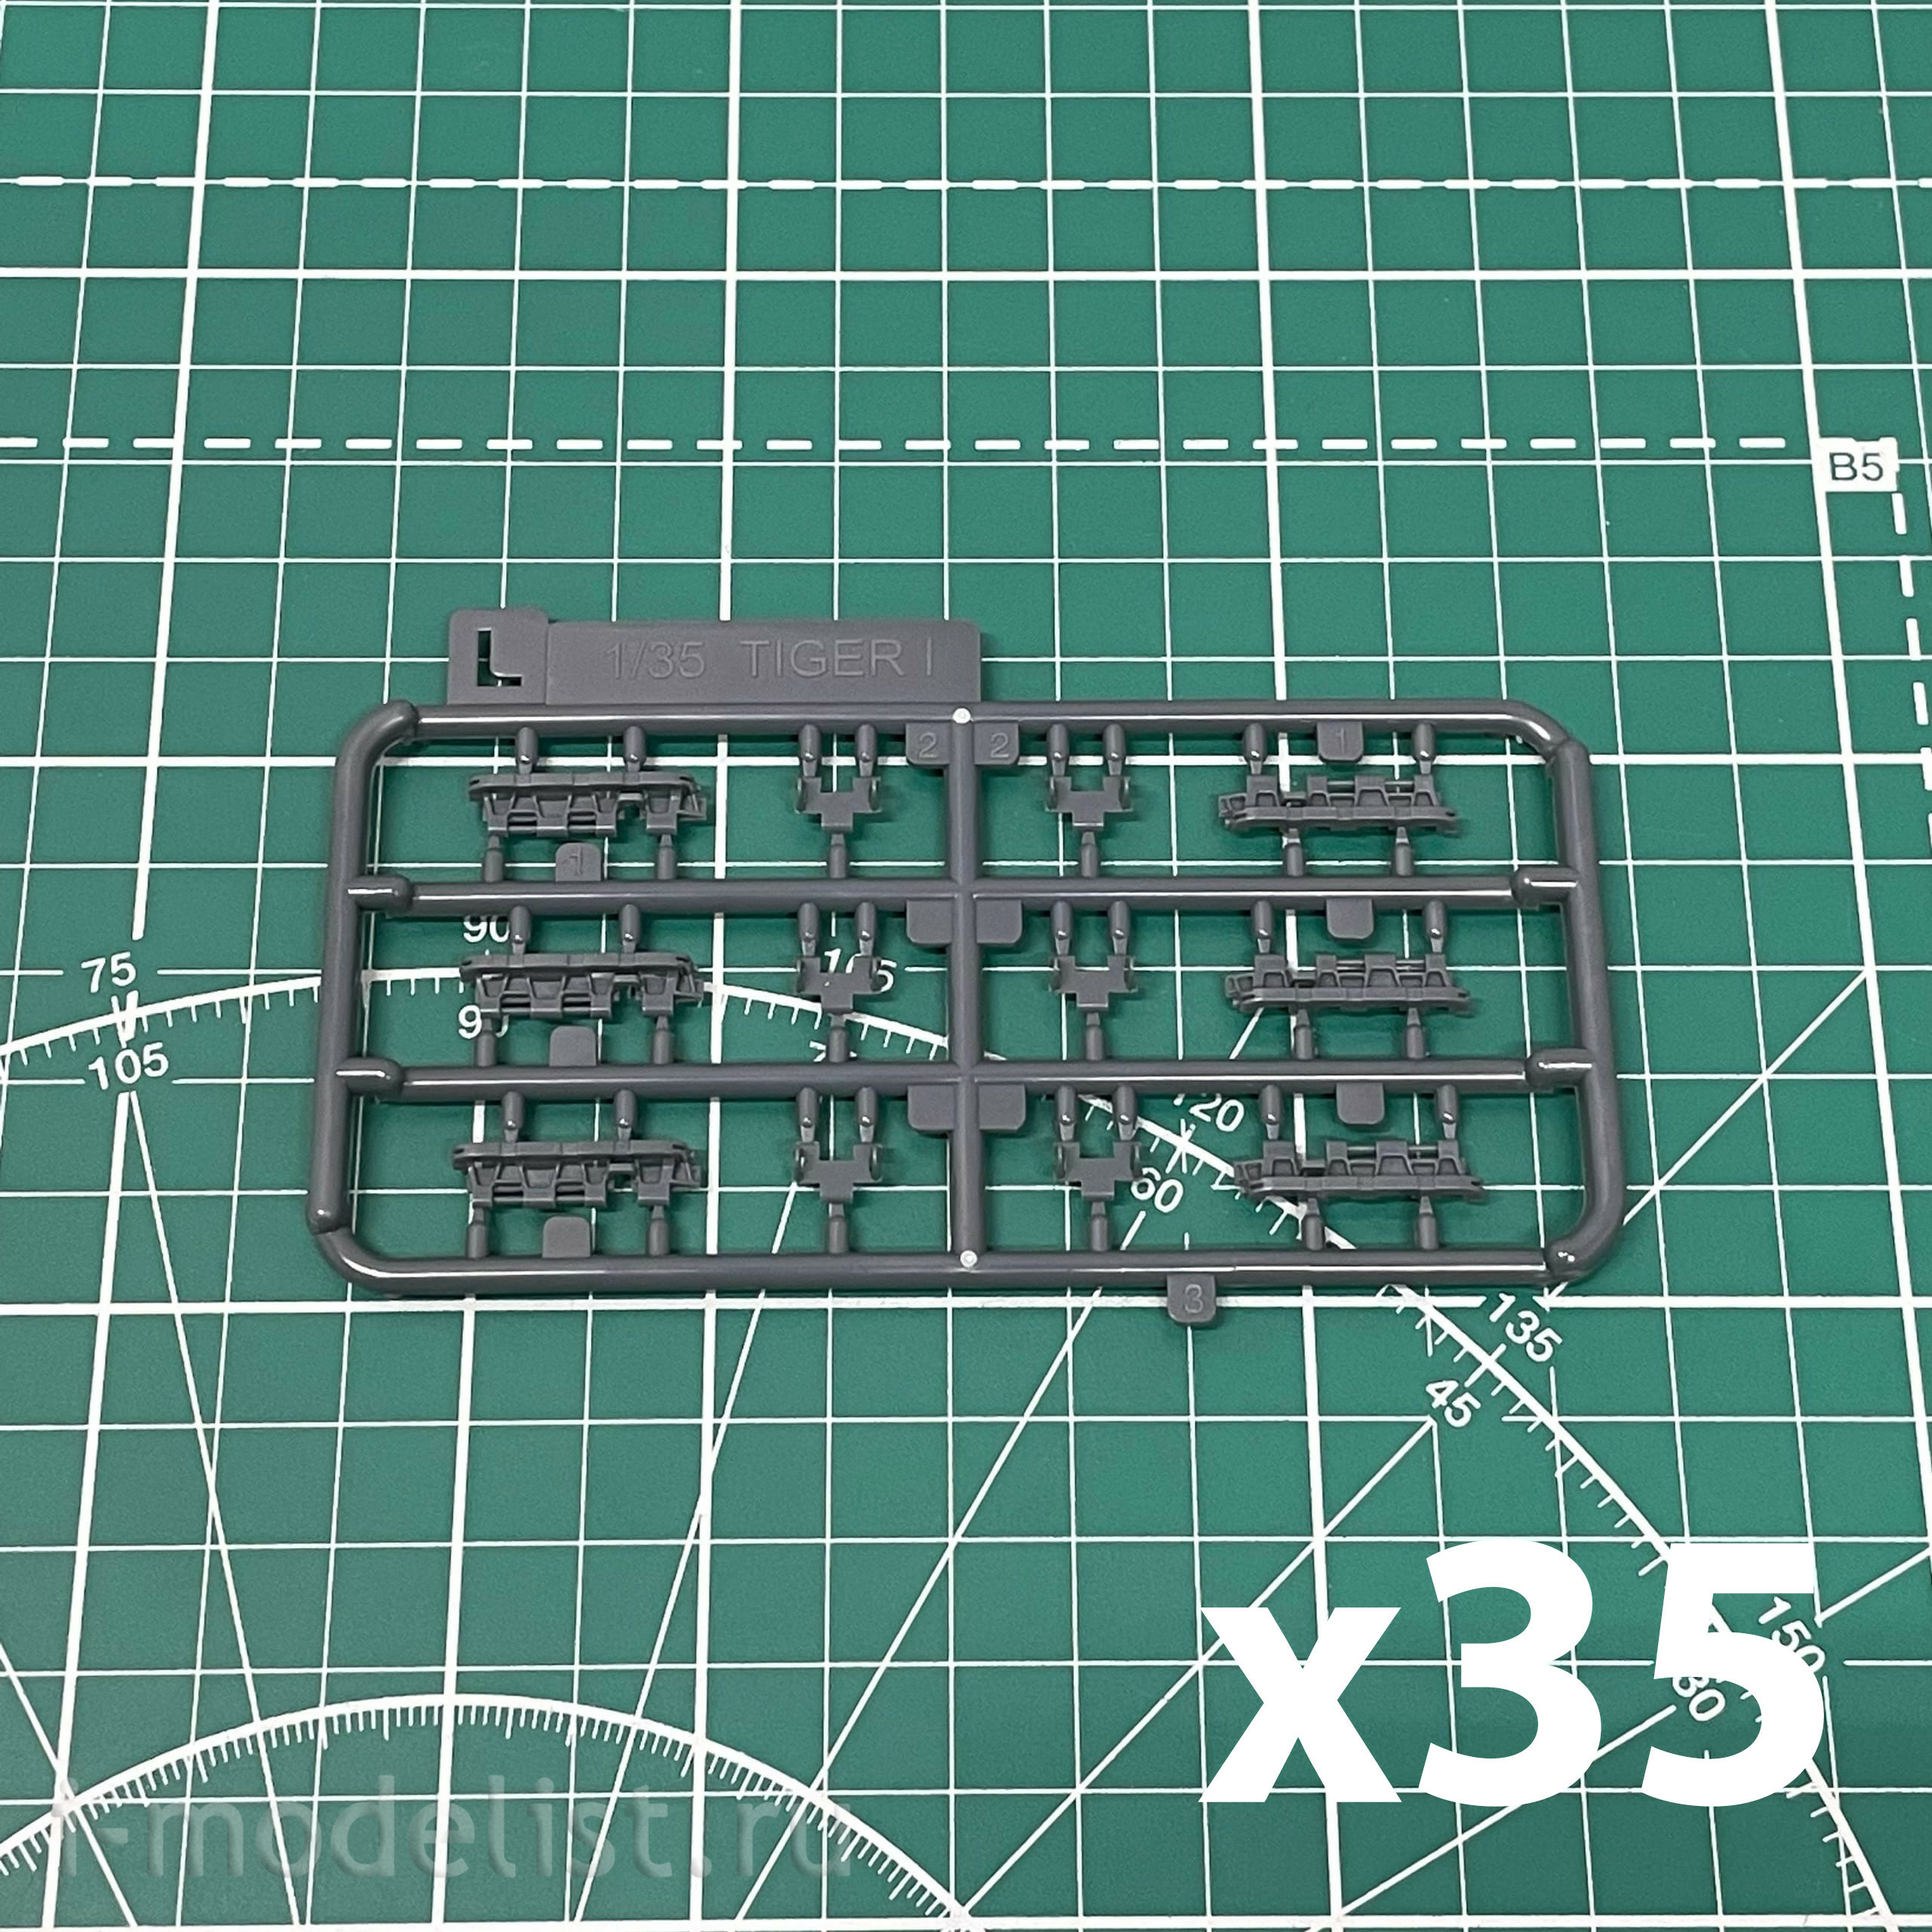 RM-5078 Rye Field Model 1/35 Sd.Kfz.181 Tiger I INITIAL PRODUCTION